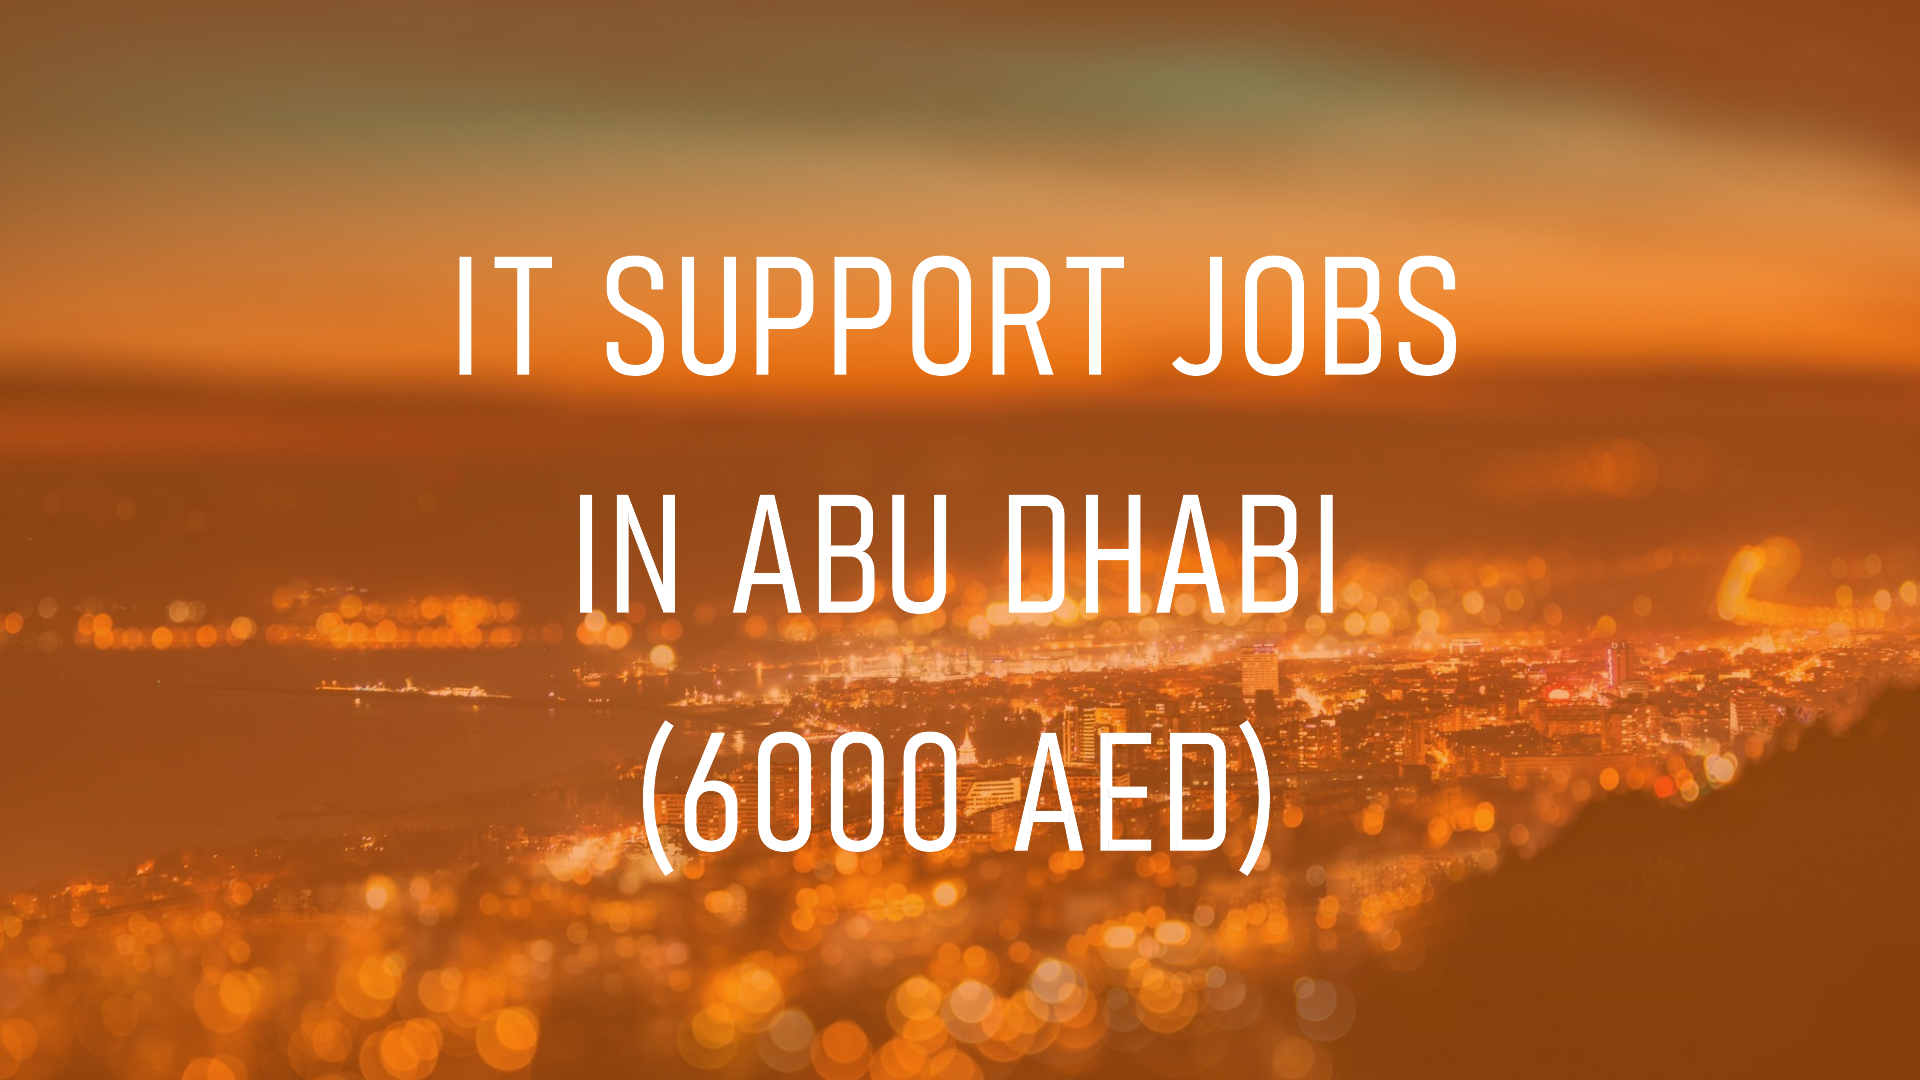 IT Support jobs in abu dhabi (6000 AED)